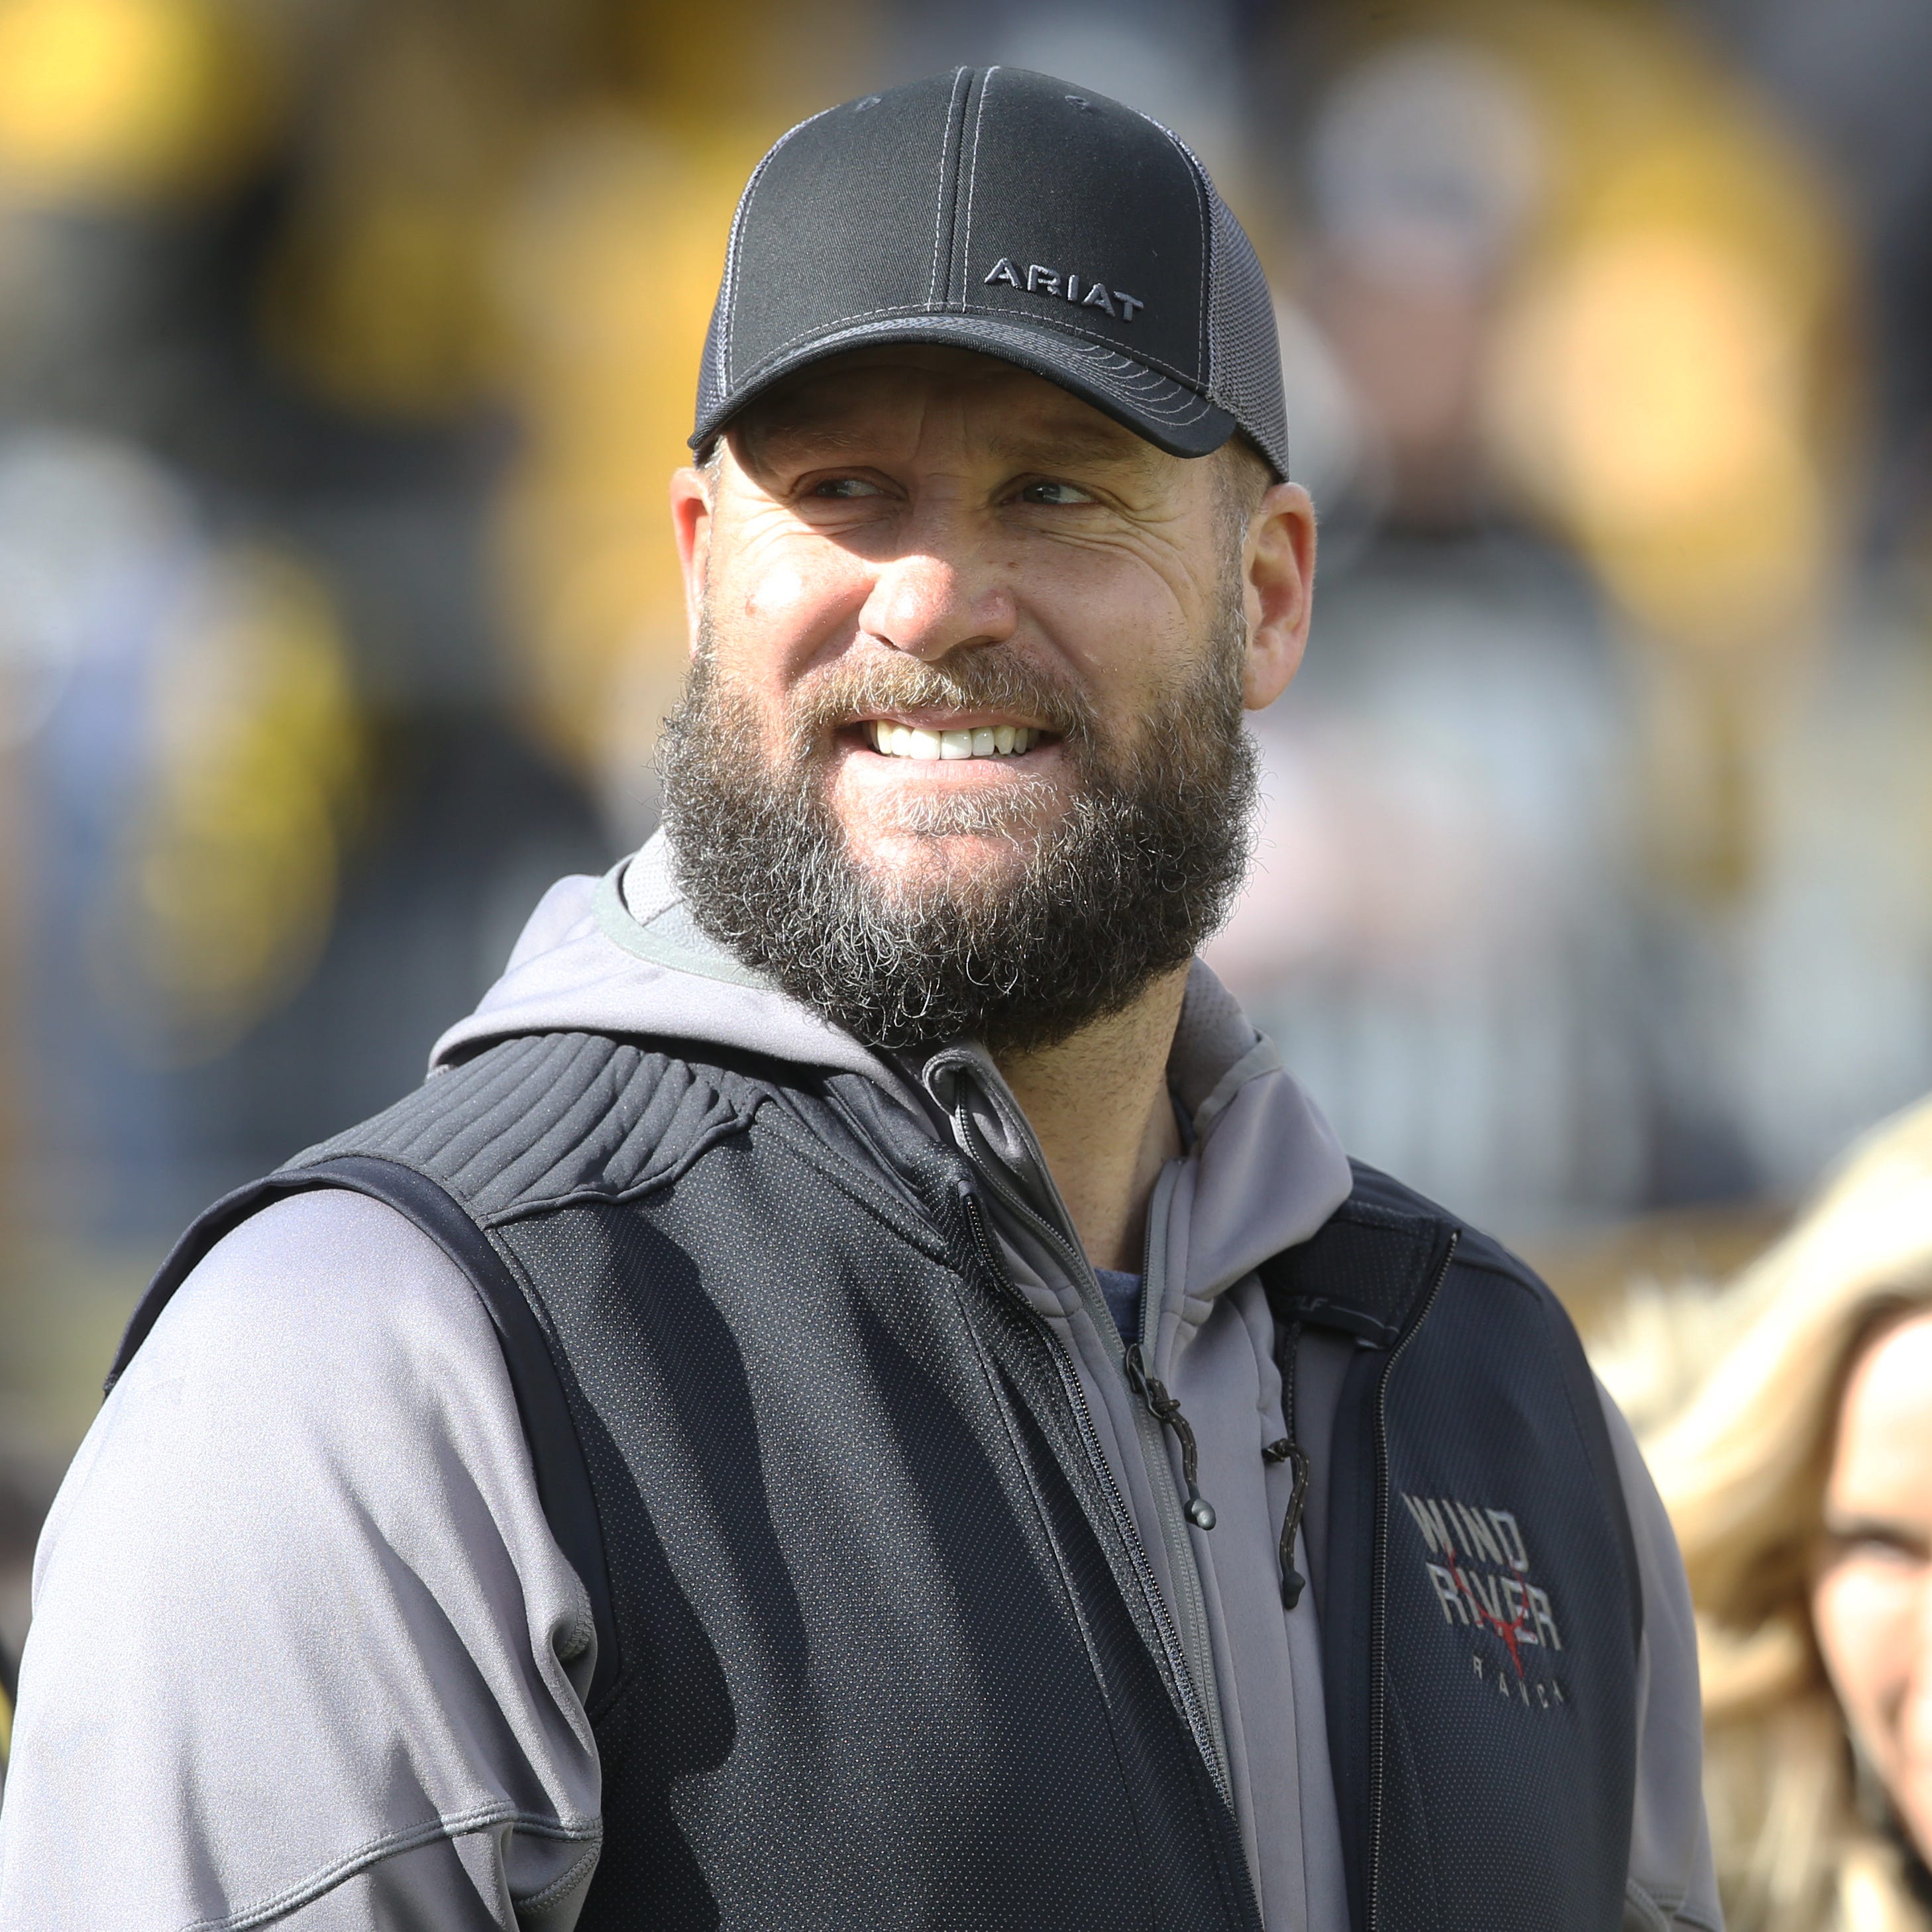 Longtime Steelers QB Ben Roethlisberger says the 49ers reached out to him and the two sides "had discussions" in the wake of major injuries to San Francisco's quarterback room.